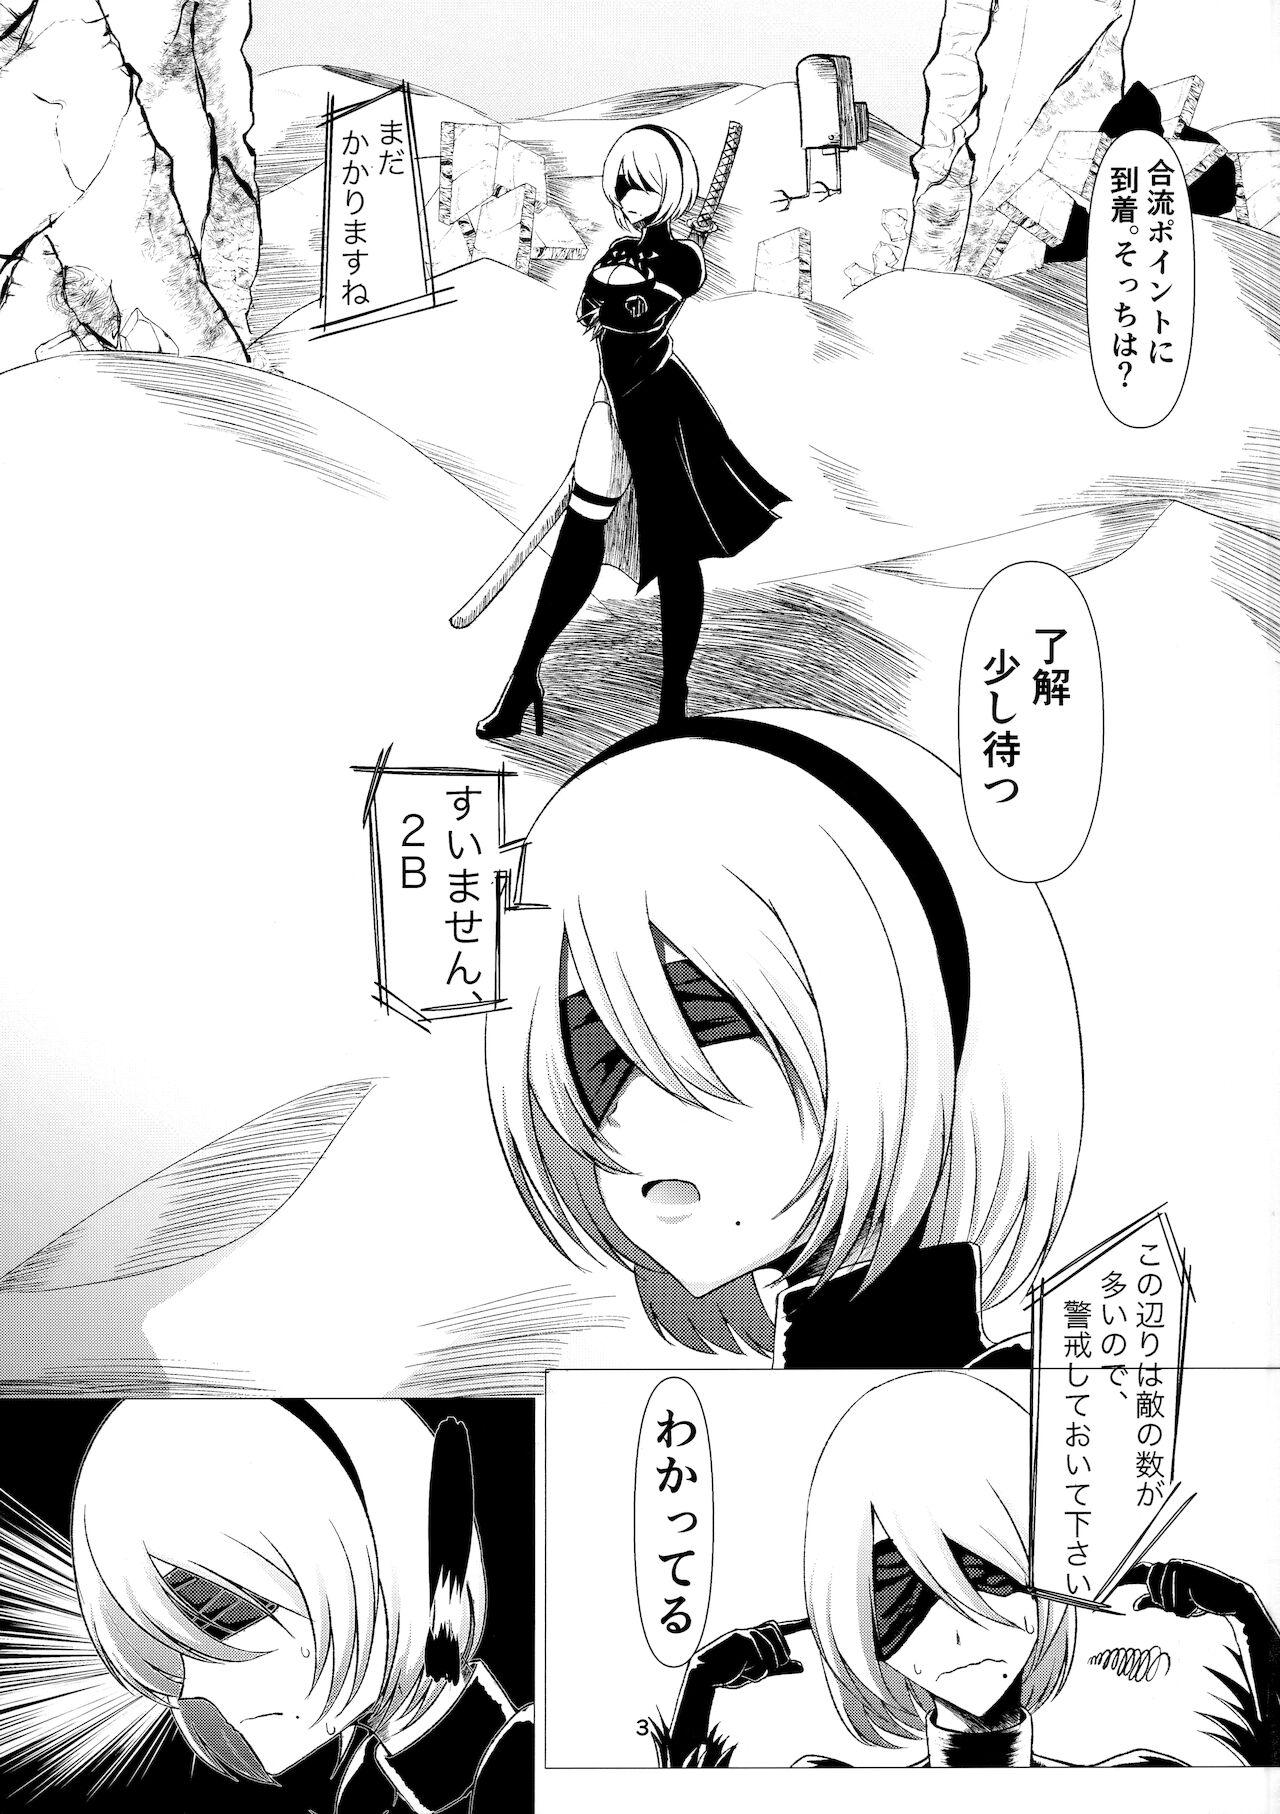 Que E690BEE4B9B3E88289E5A5B4E99AB7 2B - Nier automata Trimmed - Page 2